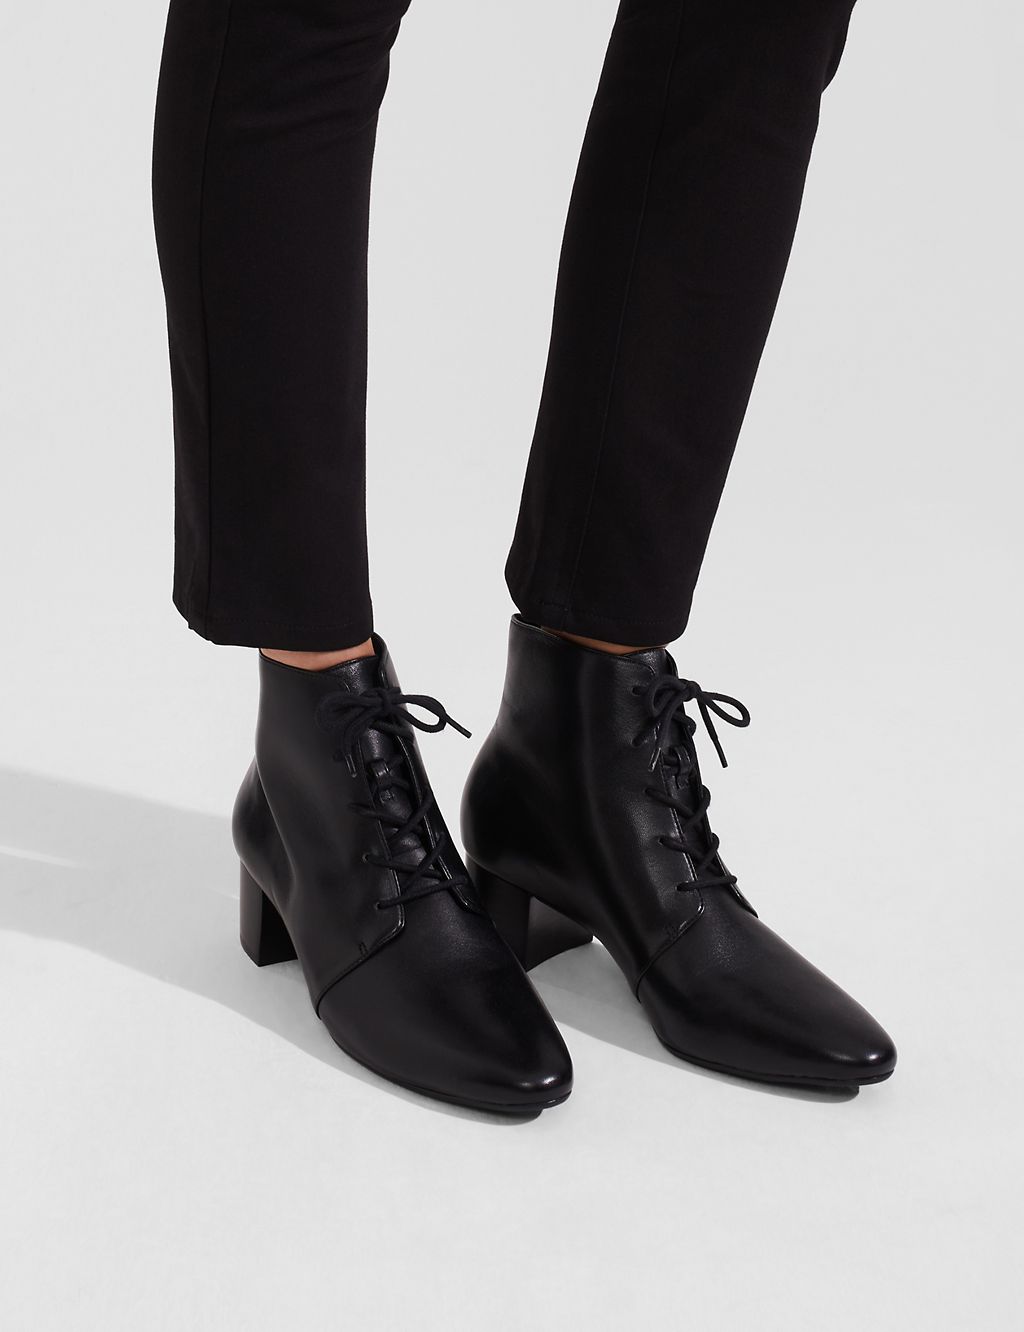 Leather Lace Up Block Heel Ankle Boots | HOBBS | M&S